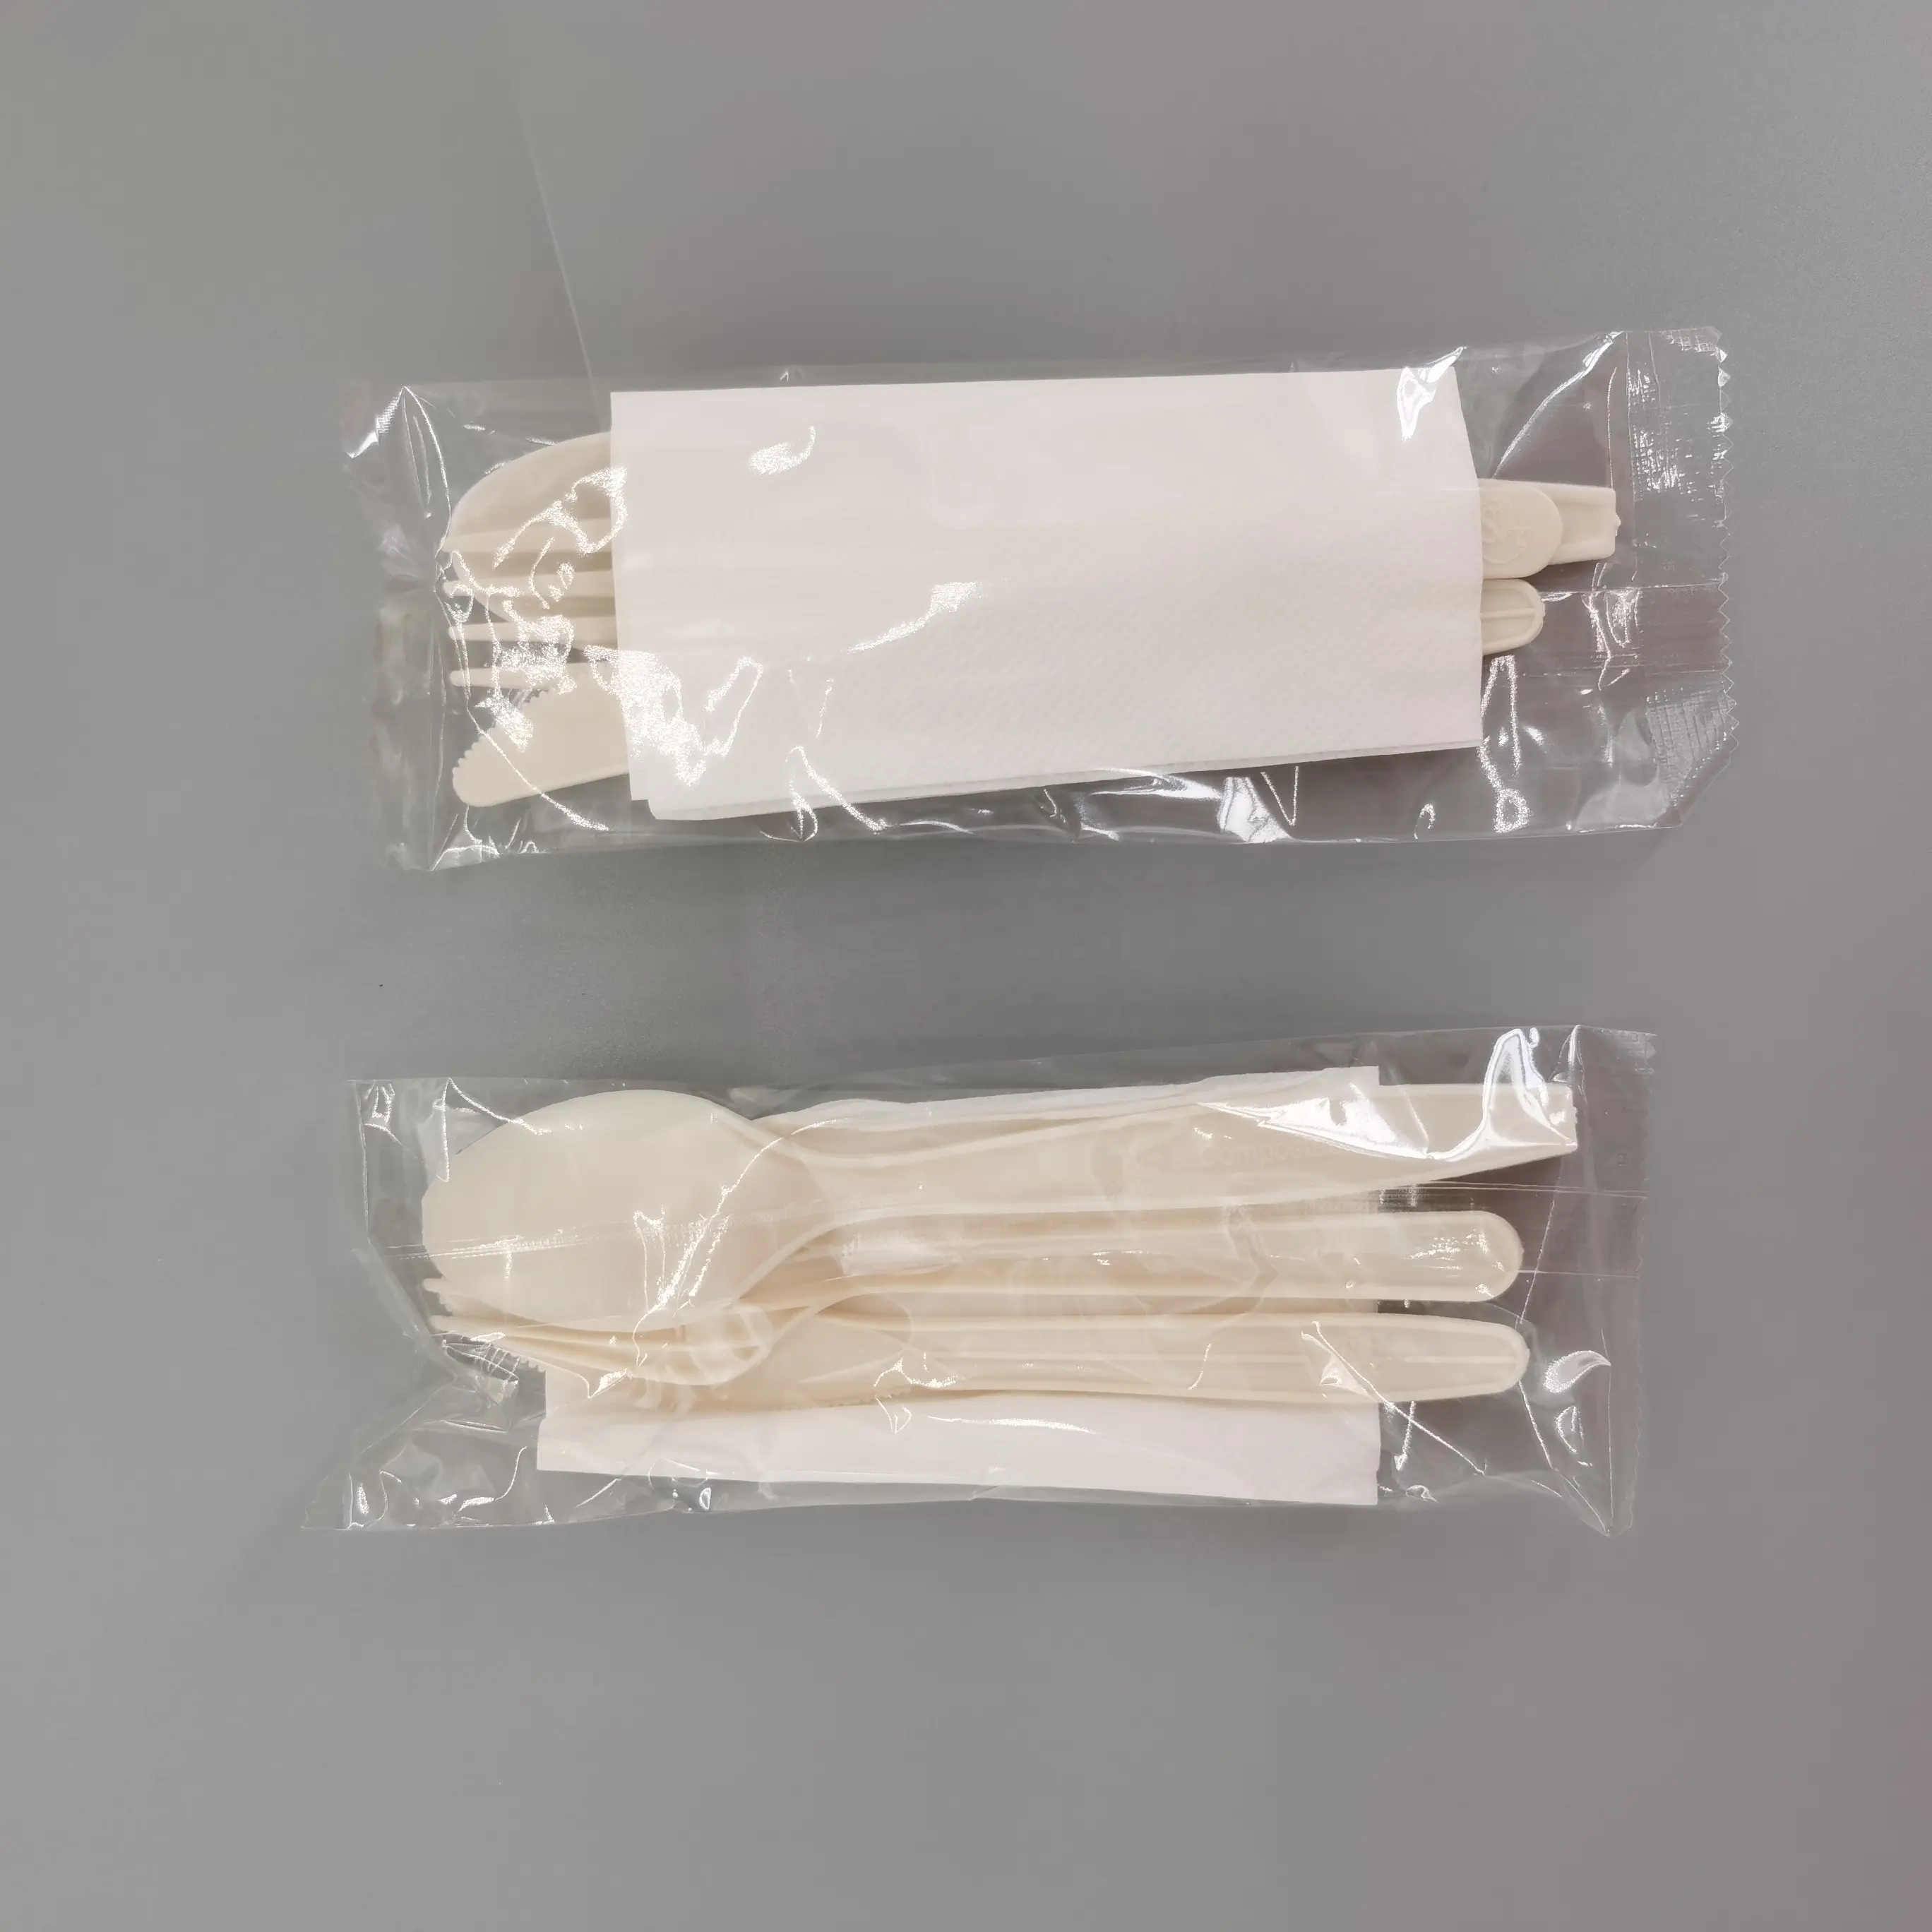 Compostable Cutlery Biodegradable Corn Starch Disposable Plastic Tableware Sets Knife